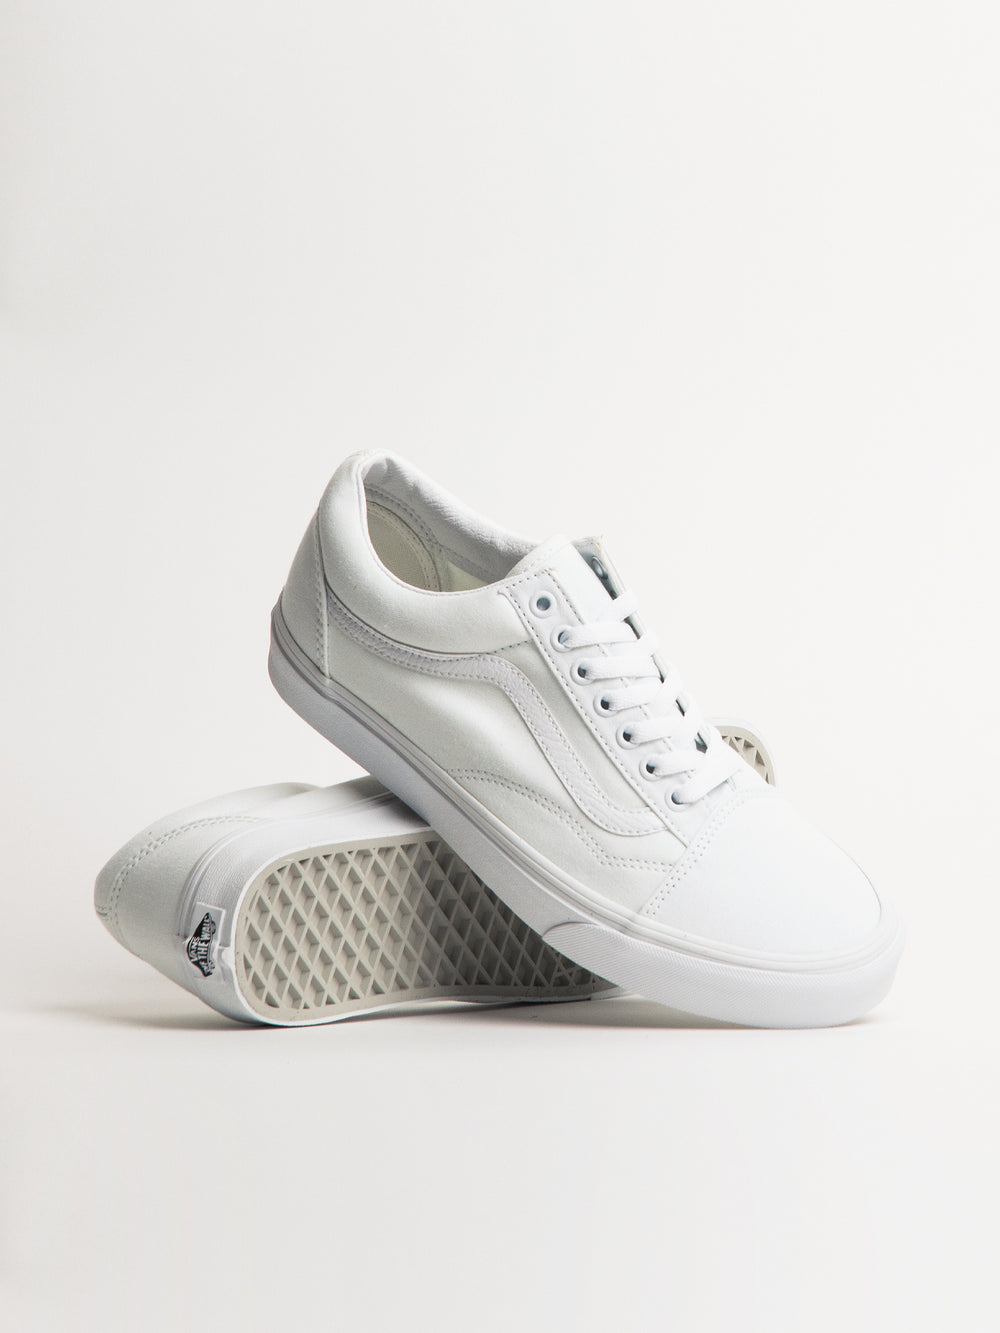 MENS VANS OLD SKOOL WHITE SHOES | Collective